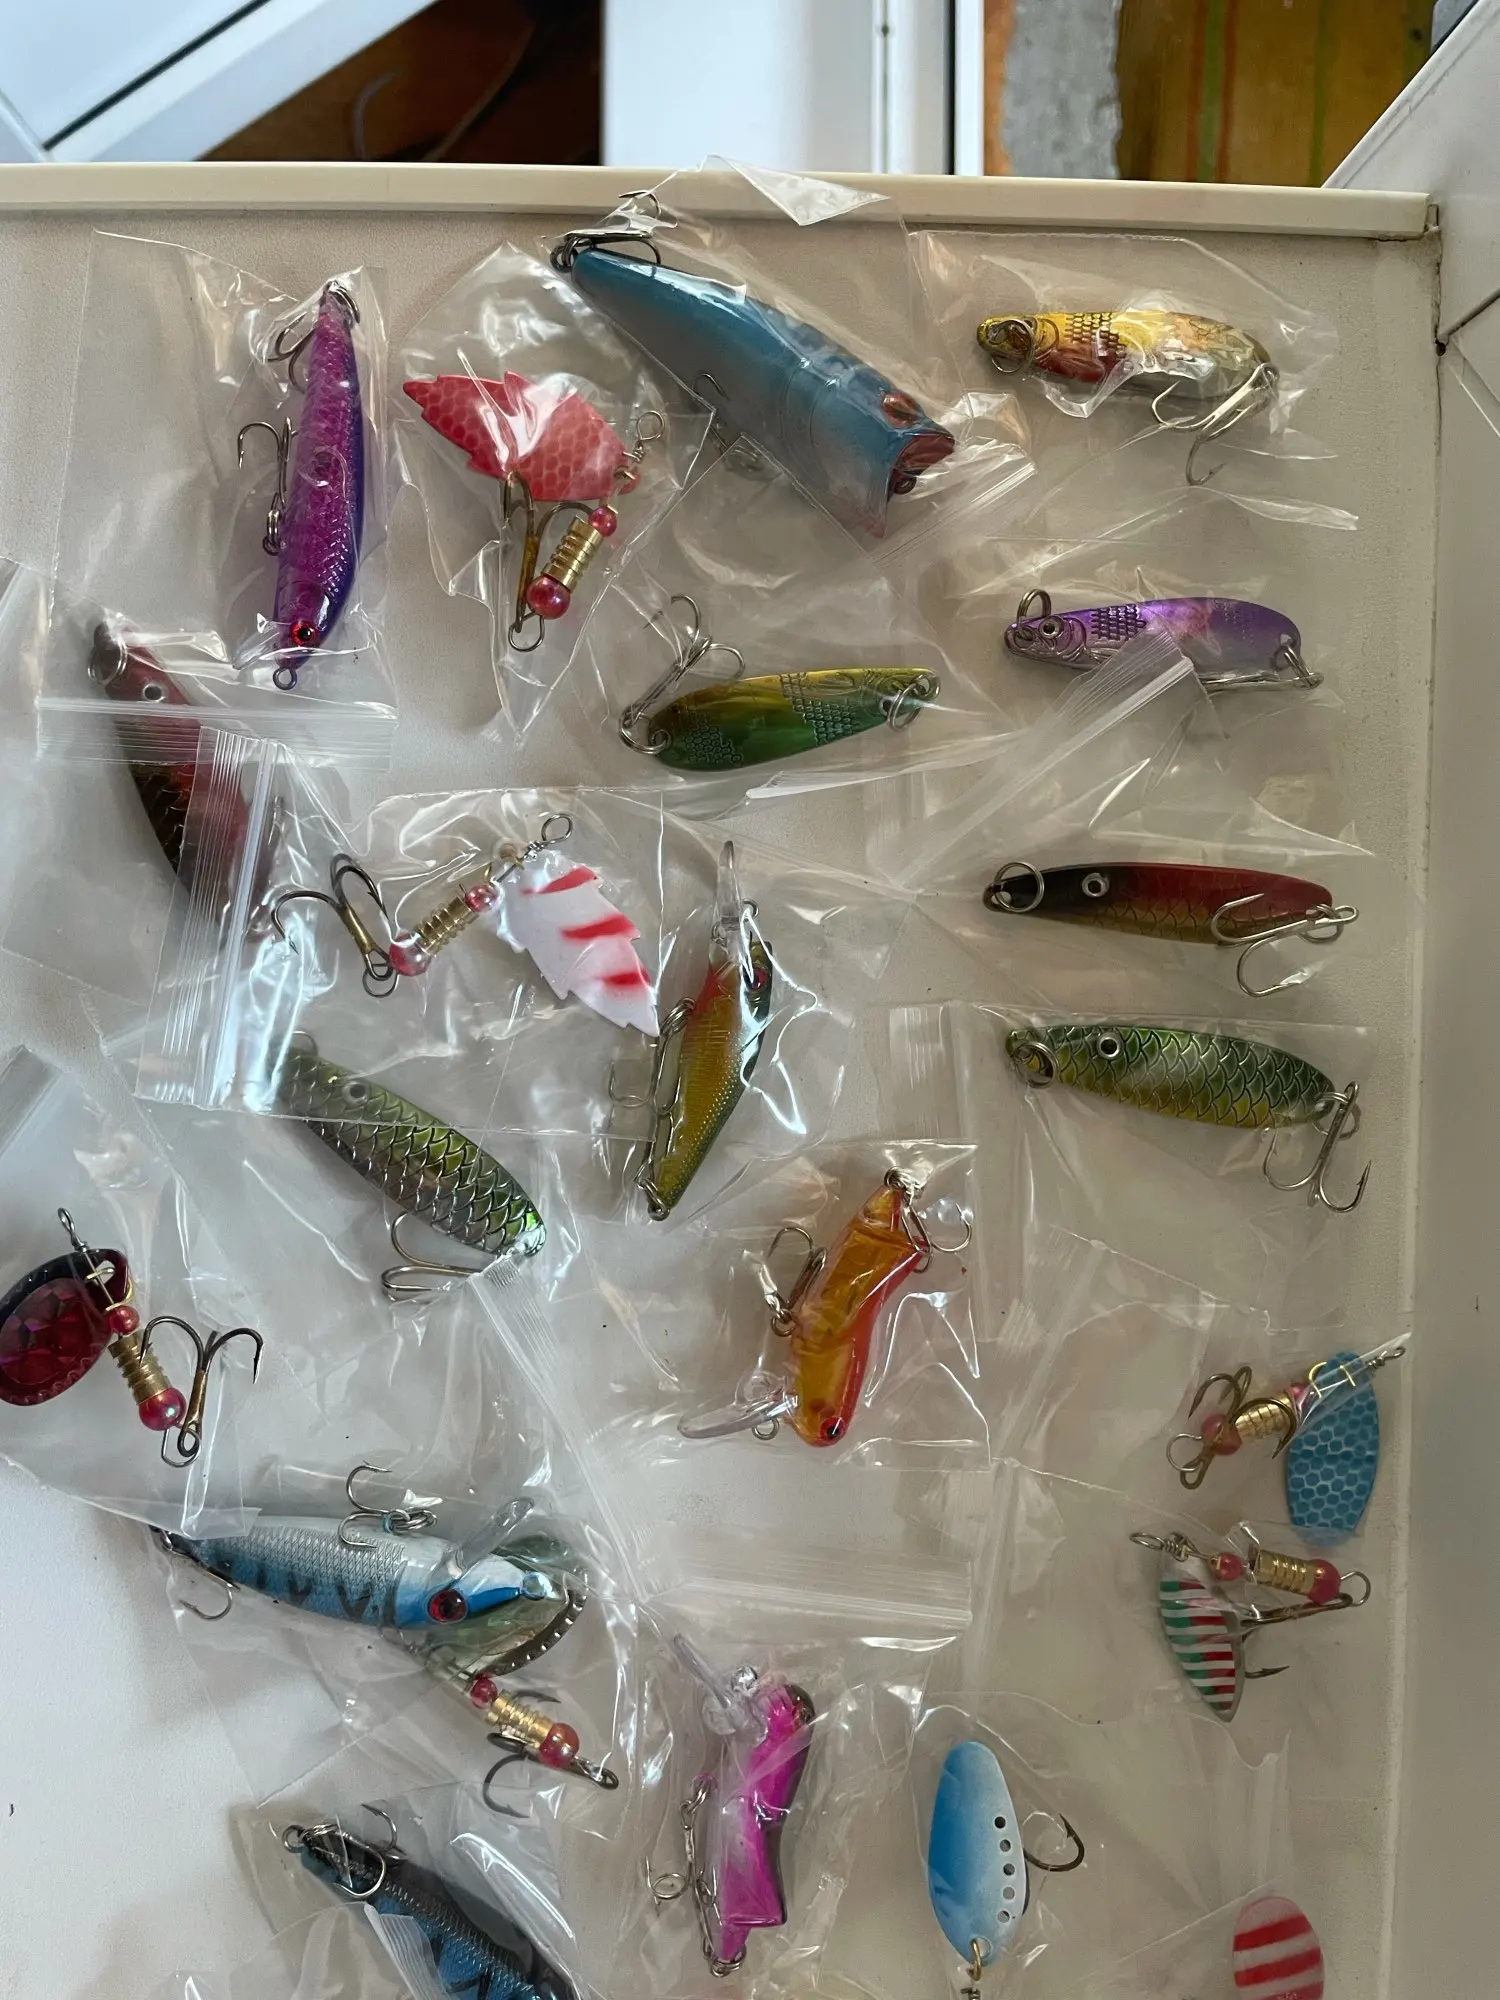 Free shipping 30pcs/lot Mixed Colo Fishing Lure Set Fishing Tackle  Spoon/Spinner/Hard Lure Artifical Bait Pesca - Price history & Review, AliExpress Seller - fishing together Store